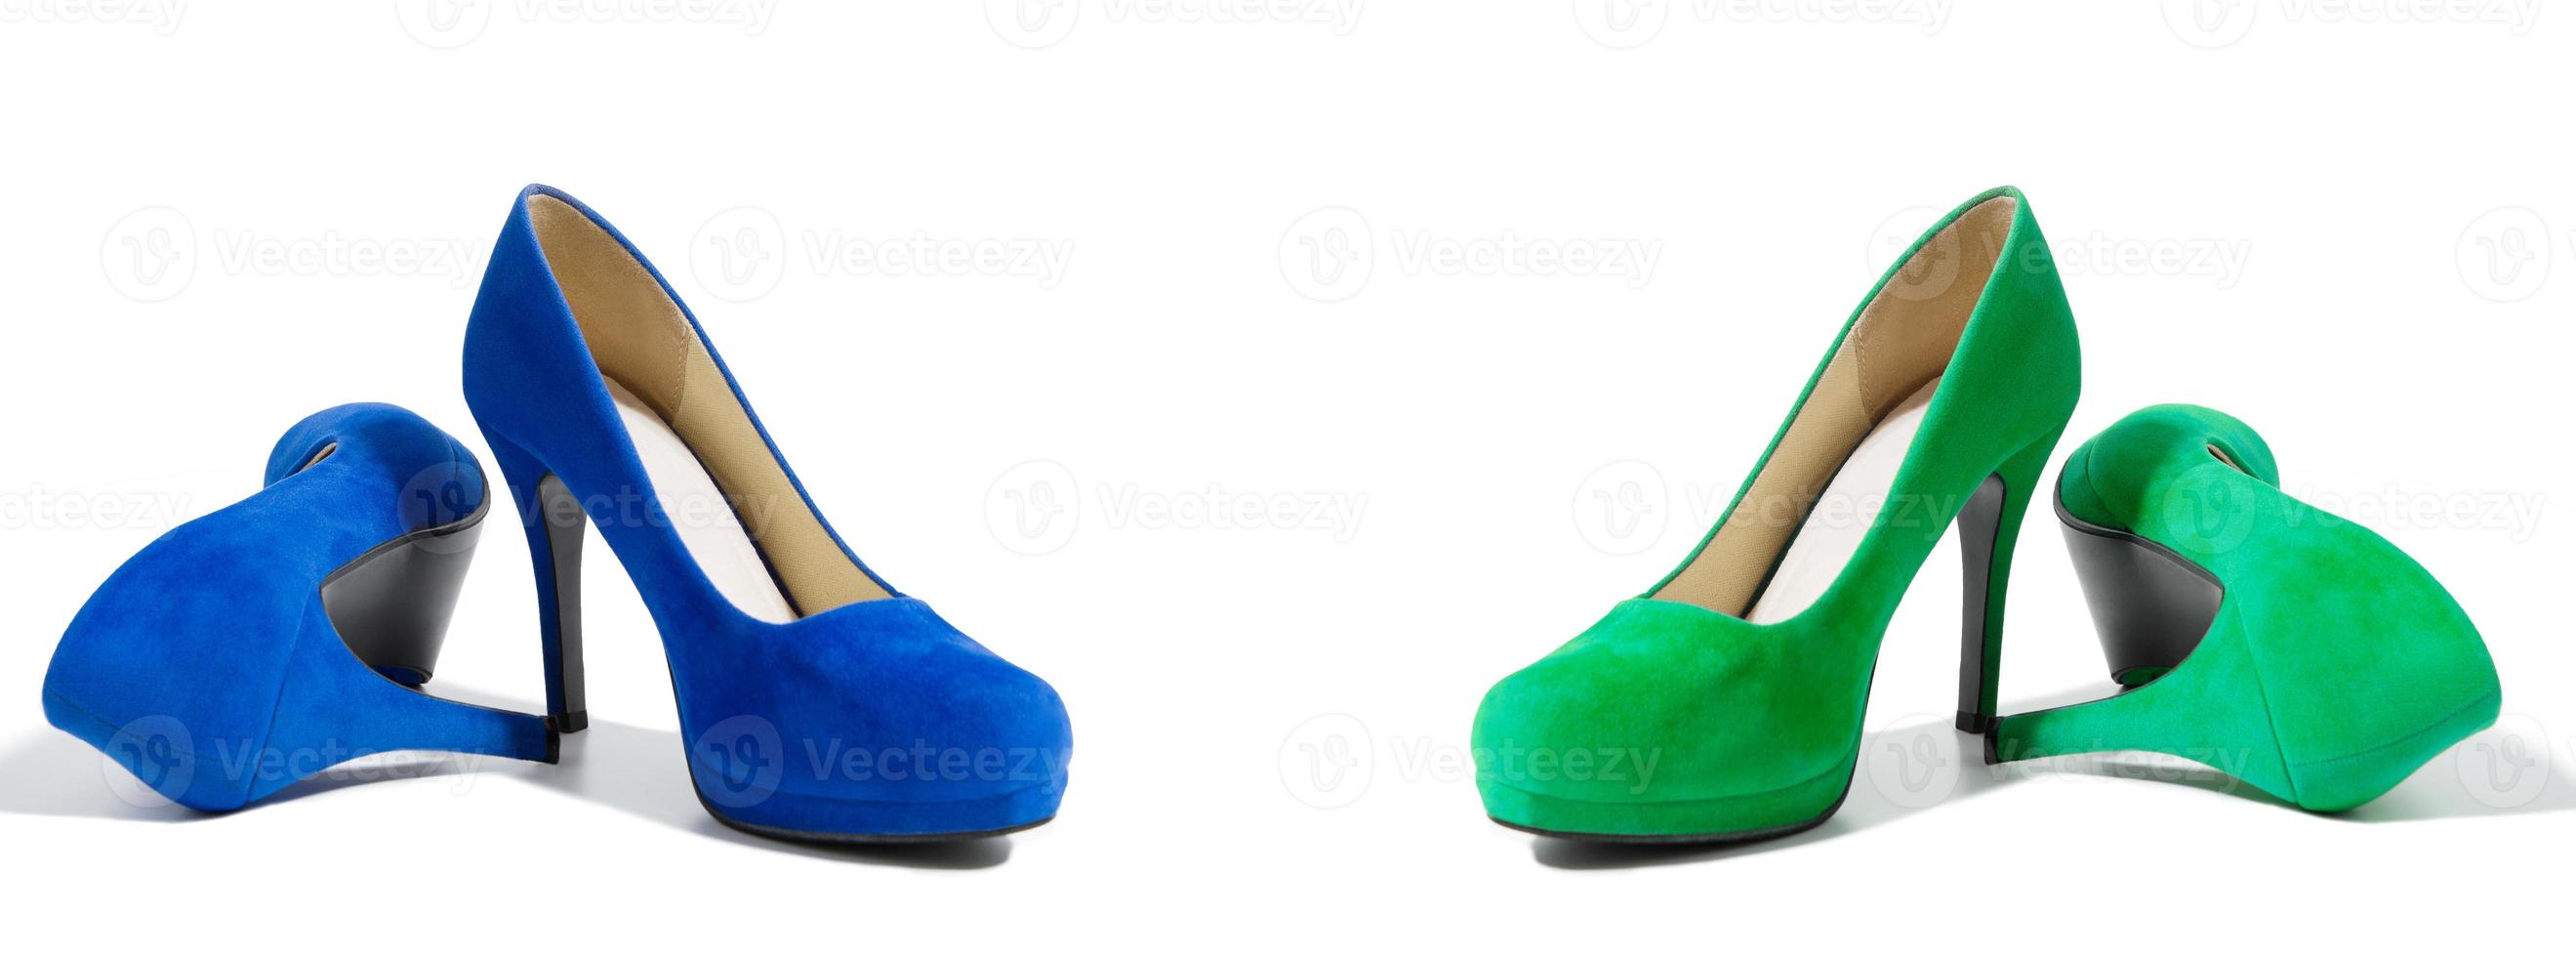 Closeup of fashionable high heels shoes isolated on white background. Green and blue color woman shoe on floor. Shopping and fashion concept. Copy space. Selective focus photo